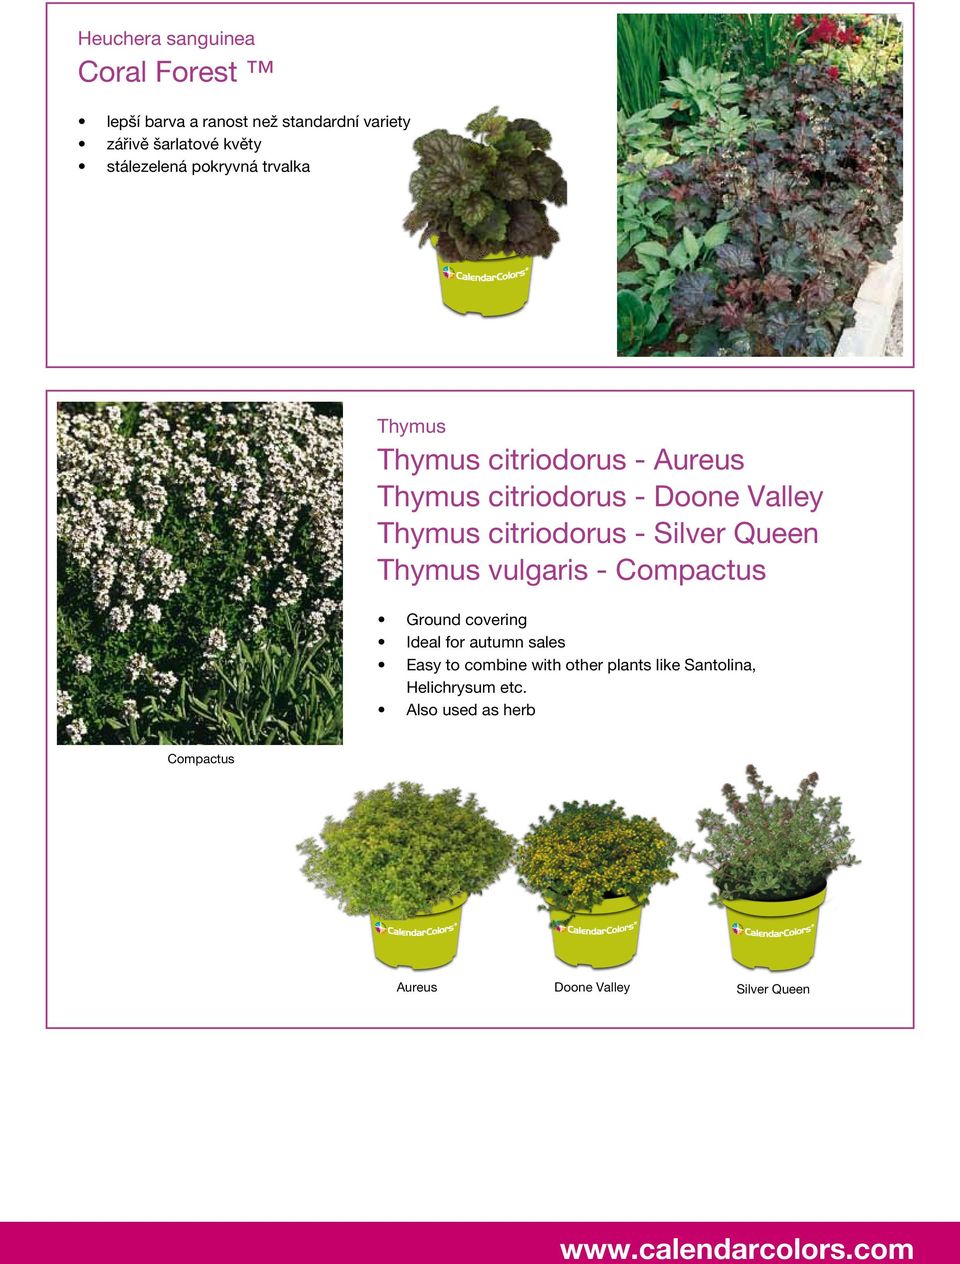 citriodorus - Silver Queen Thymus vulgaris - Compactus Ground covering Ideal for autumn sales Easy to